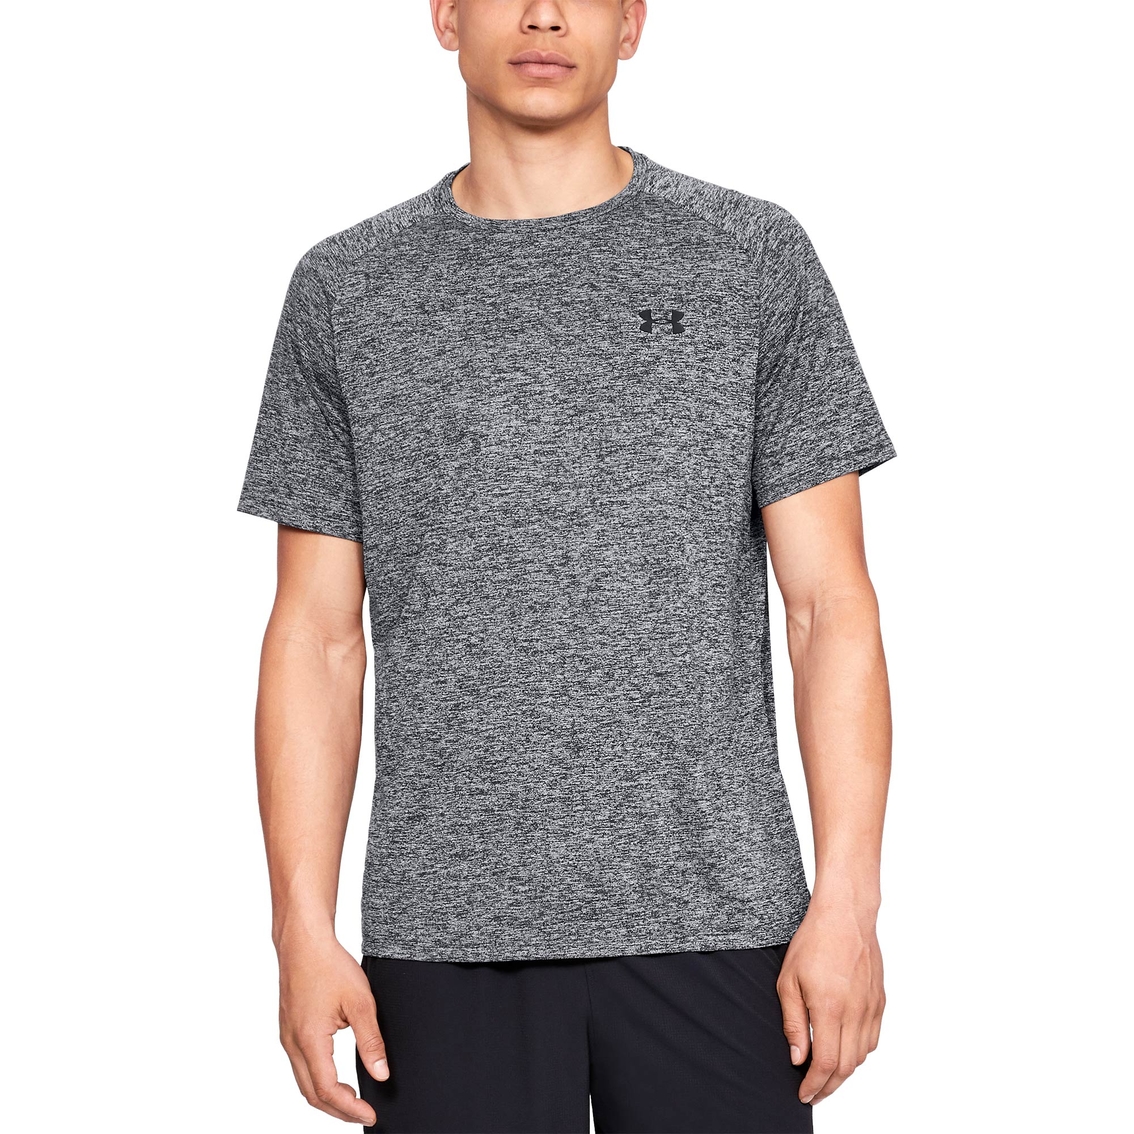 Under Armour The Tech Tee - Image 1 of 2